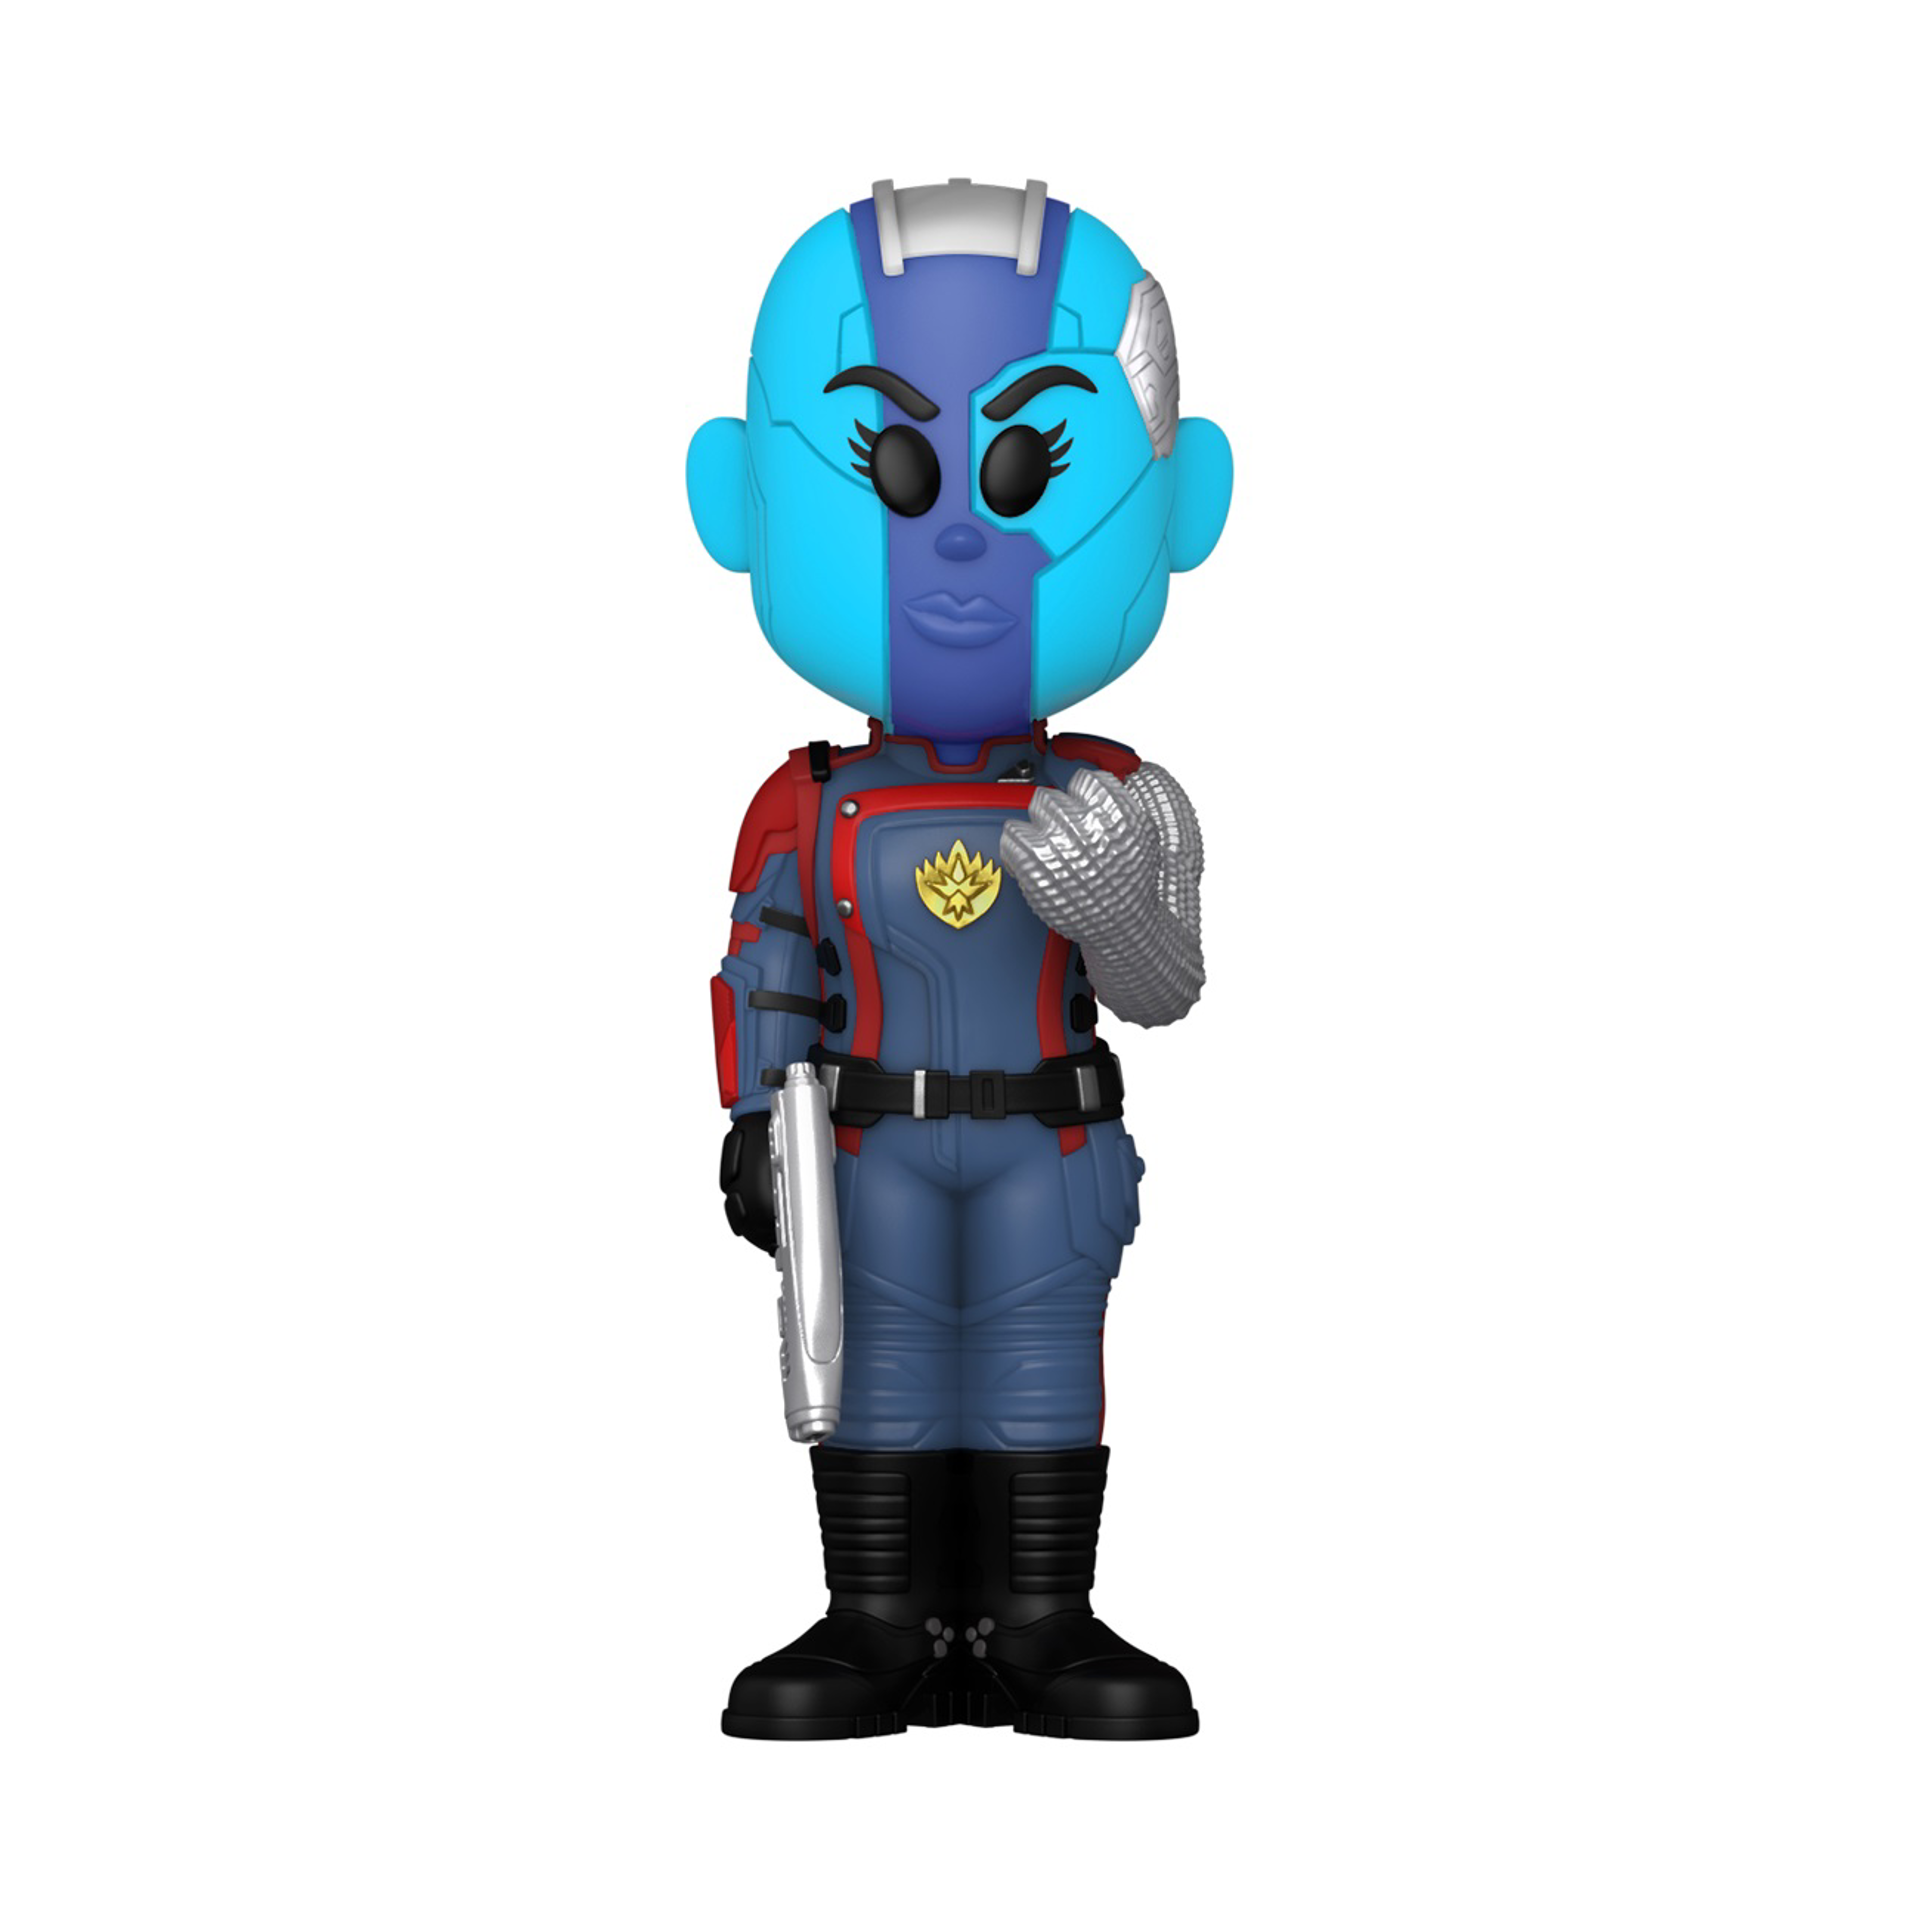 Funko Vinyl Soda: Guardians of the Galaxy 3 - Nebula (chance of special Chase edition)